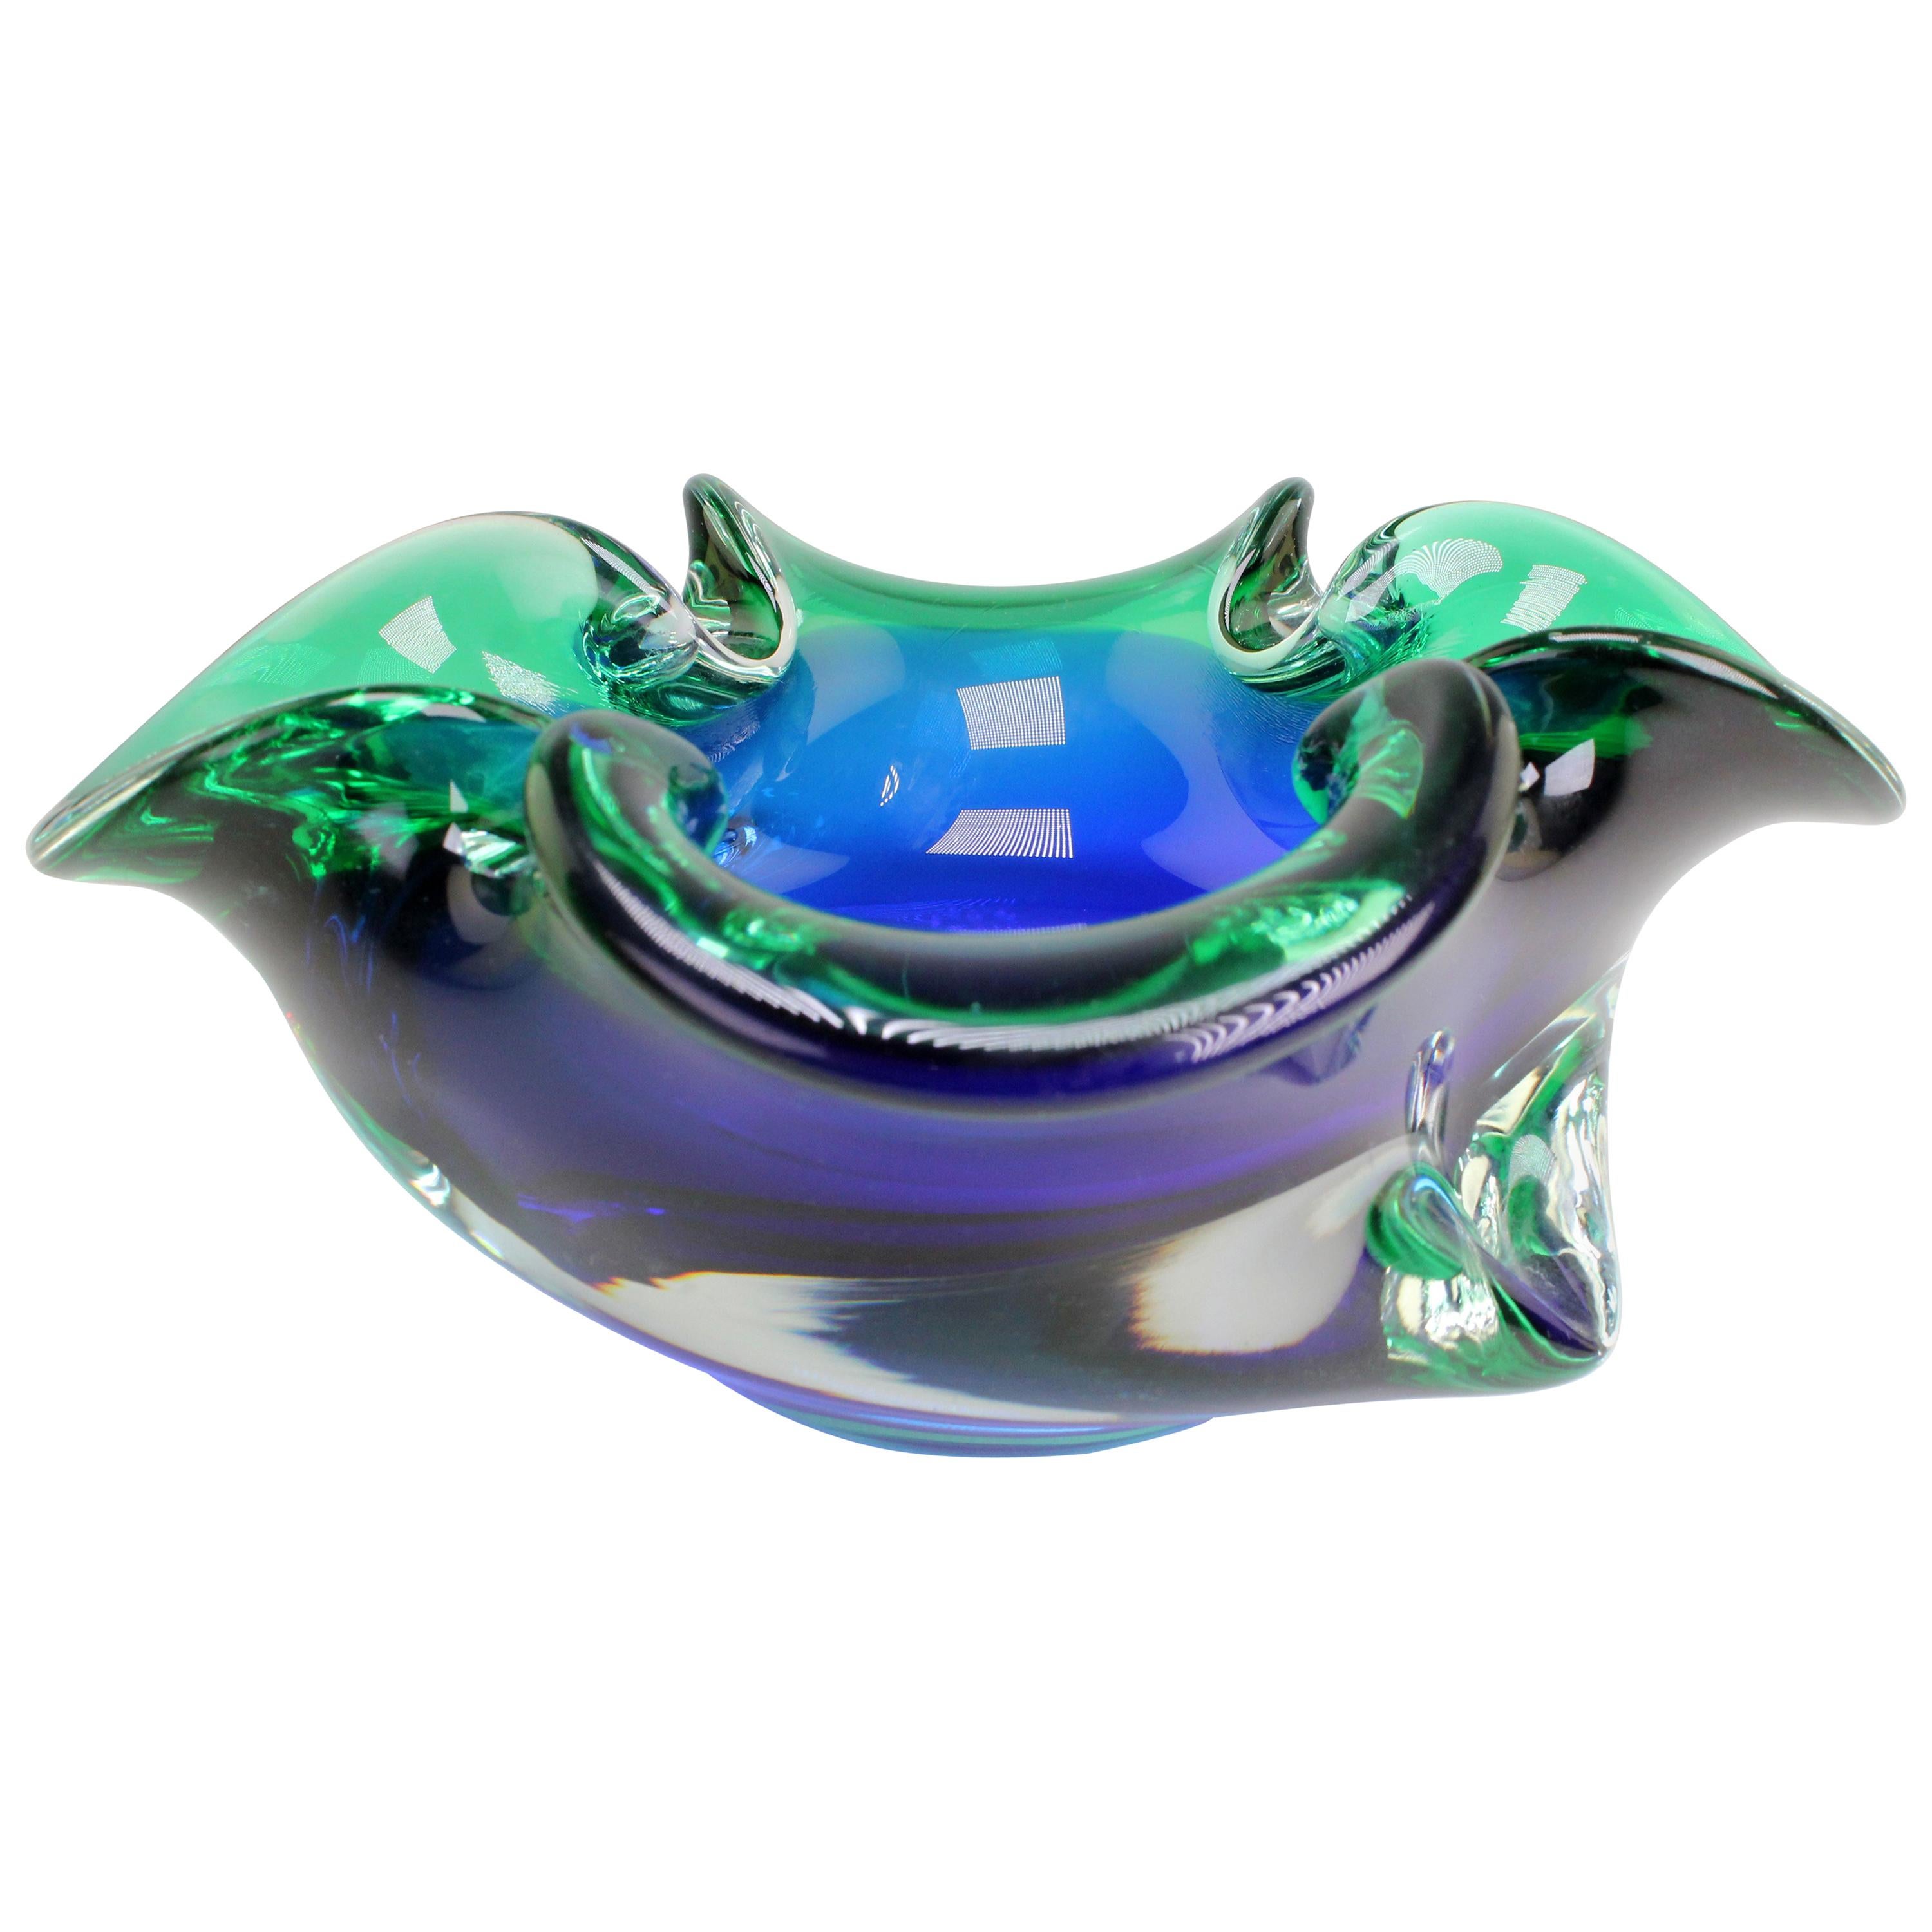 Vintage Italian Clear Blue and Emerald Green Murano Glass Bowl, 1950s